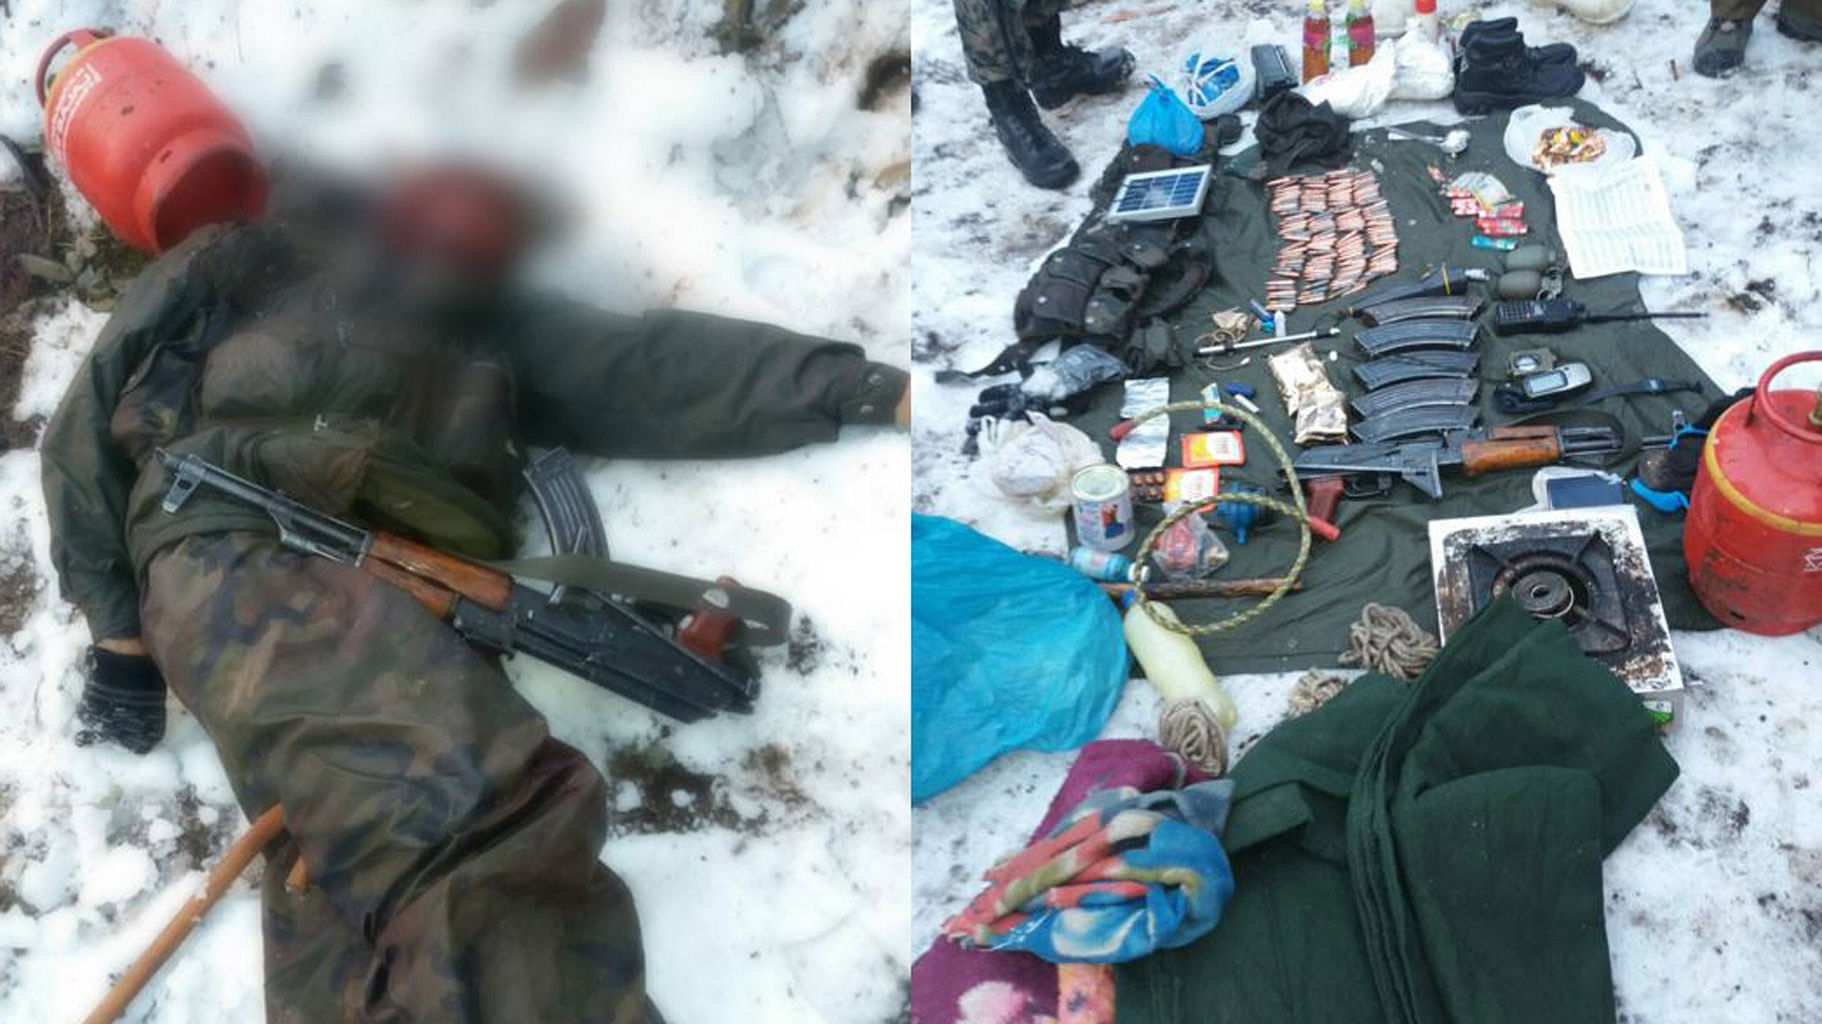 One separatist guerrilla terrorist was killed on Friday in a search operation by security forces. (Photo: ANI screengrabs)